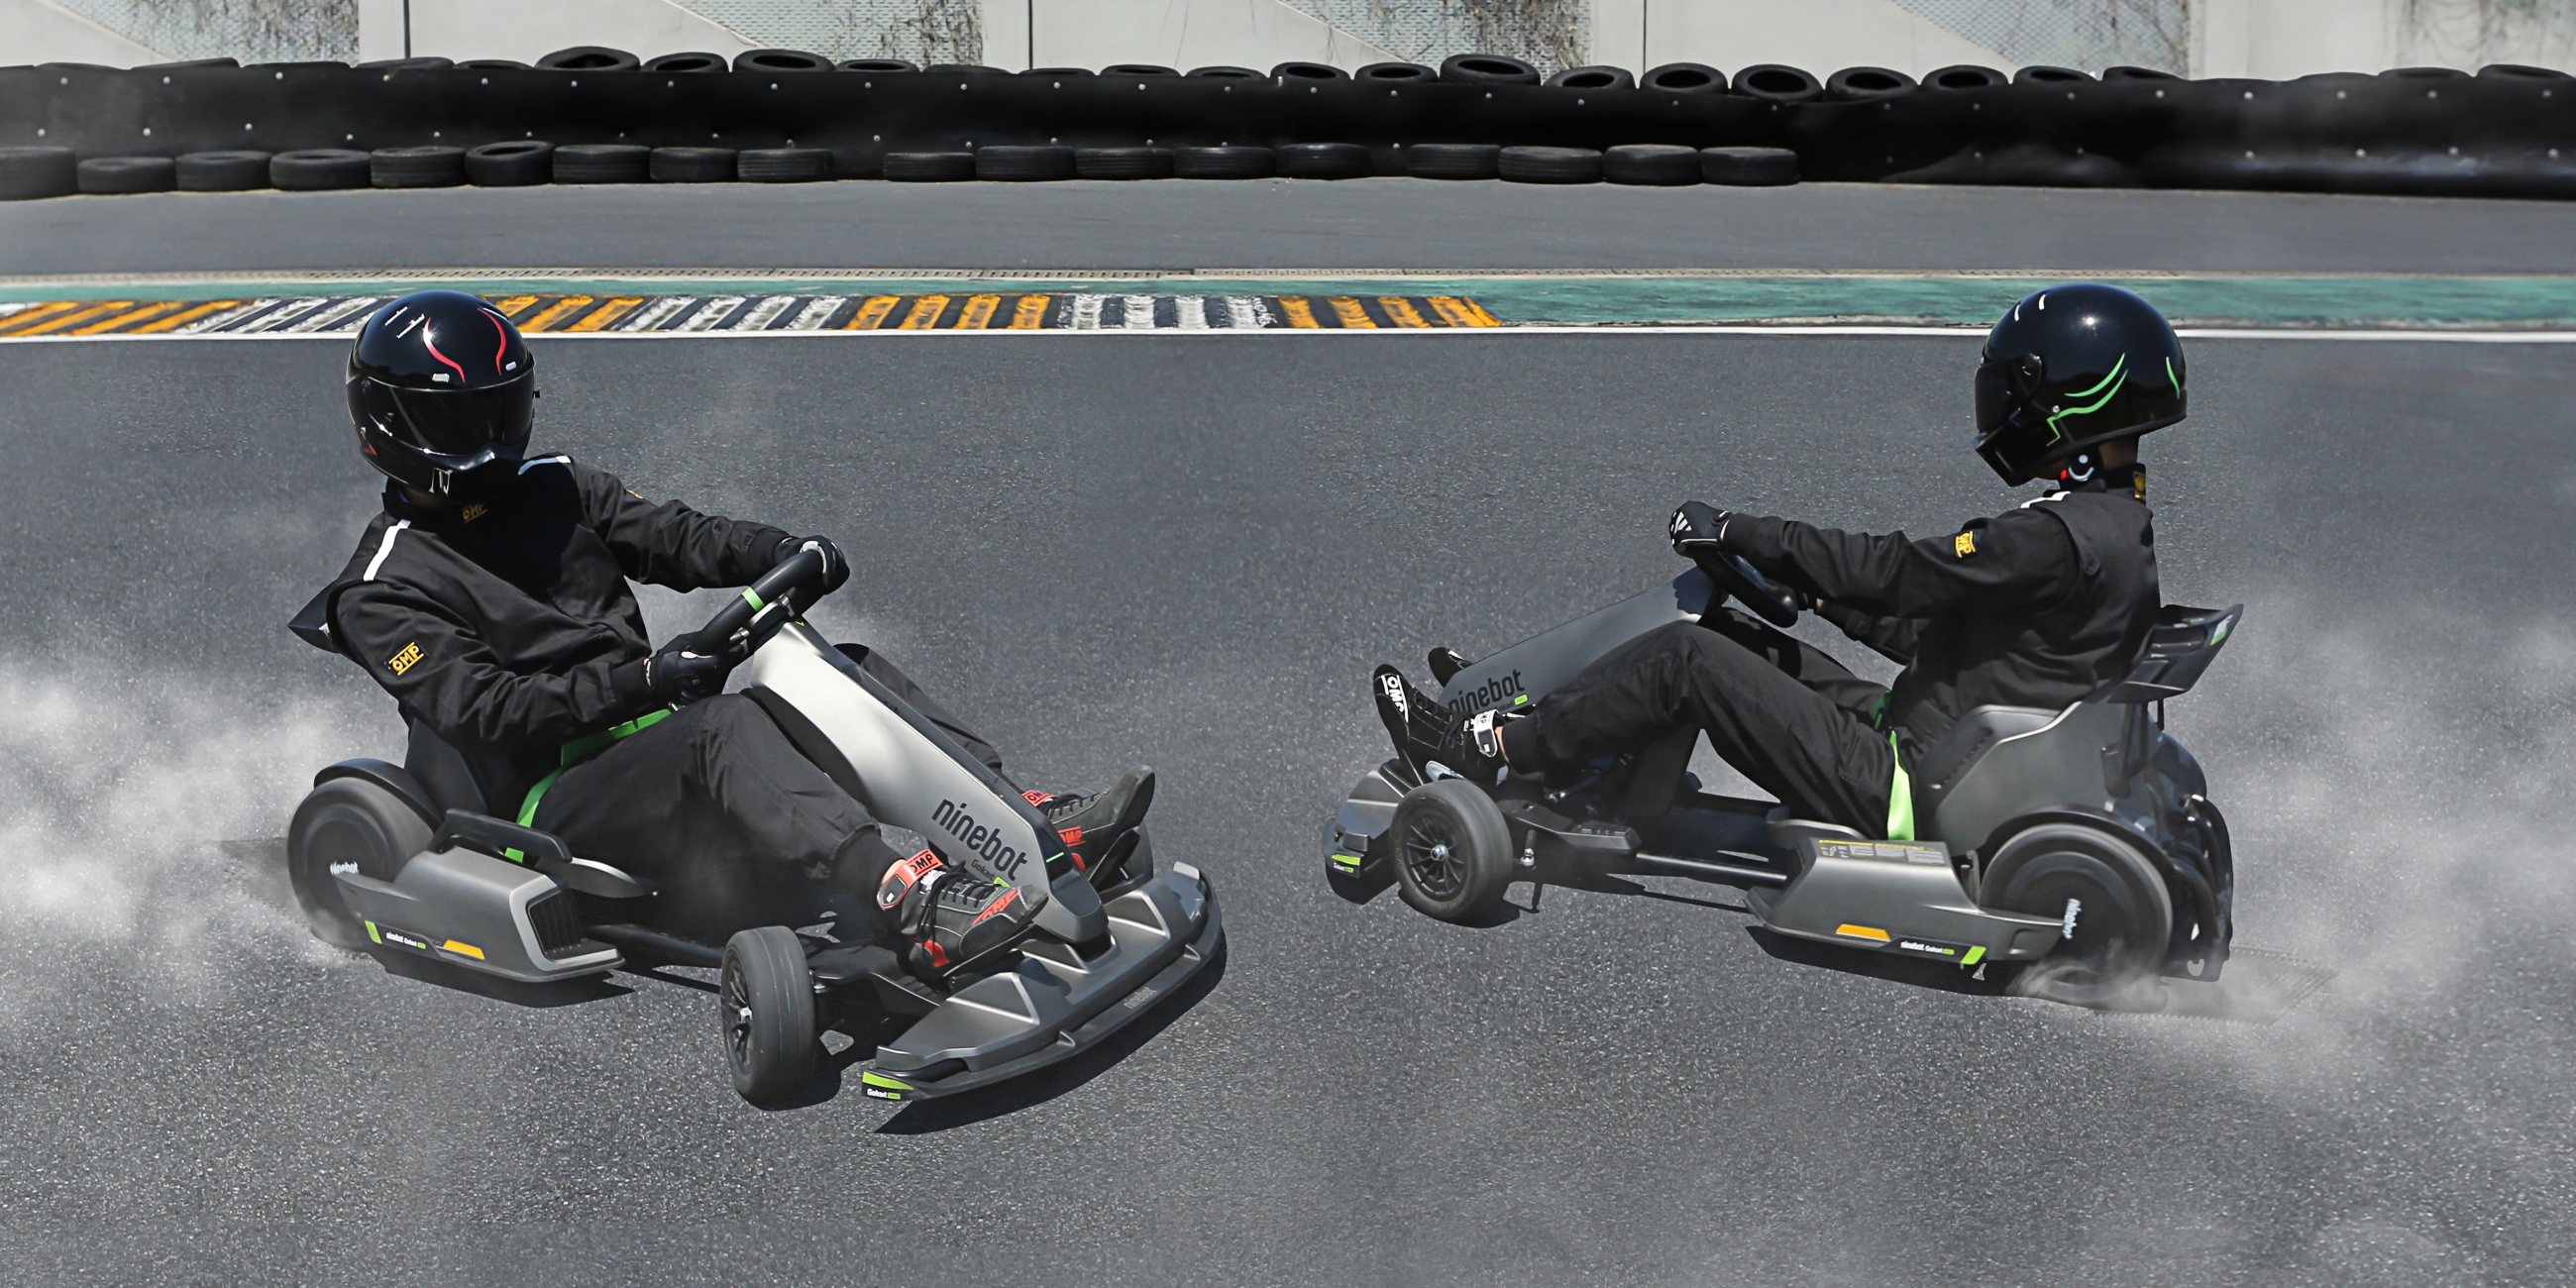 Mold Kemiker Skuespiller Ninebot Gokart PRO launched as faster, more powerful electric go-kart